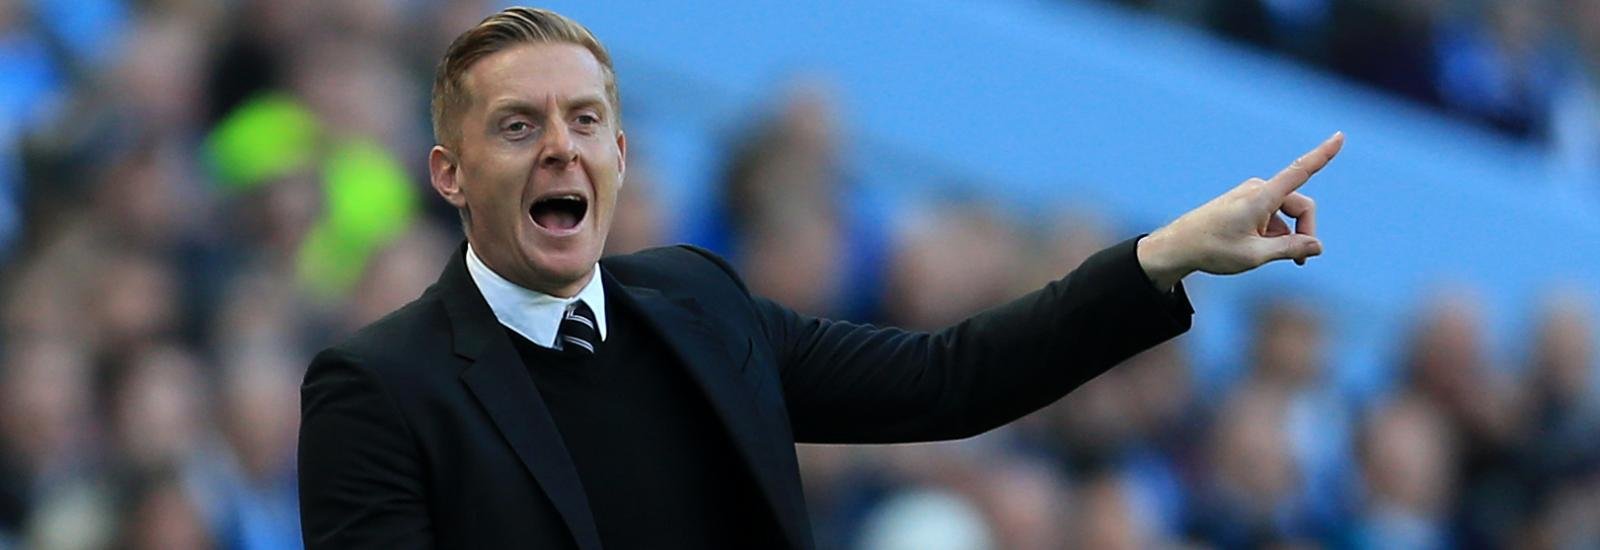 Leeds United appoint ex-Swansea City boss Garry Monk as their new head coach